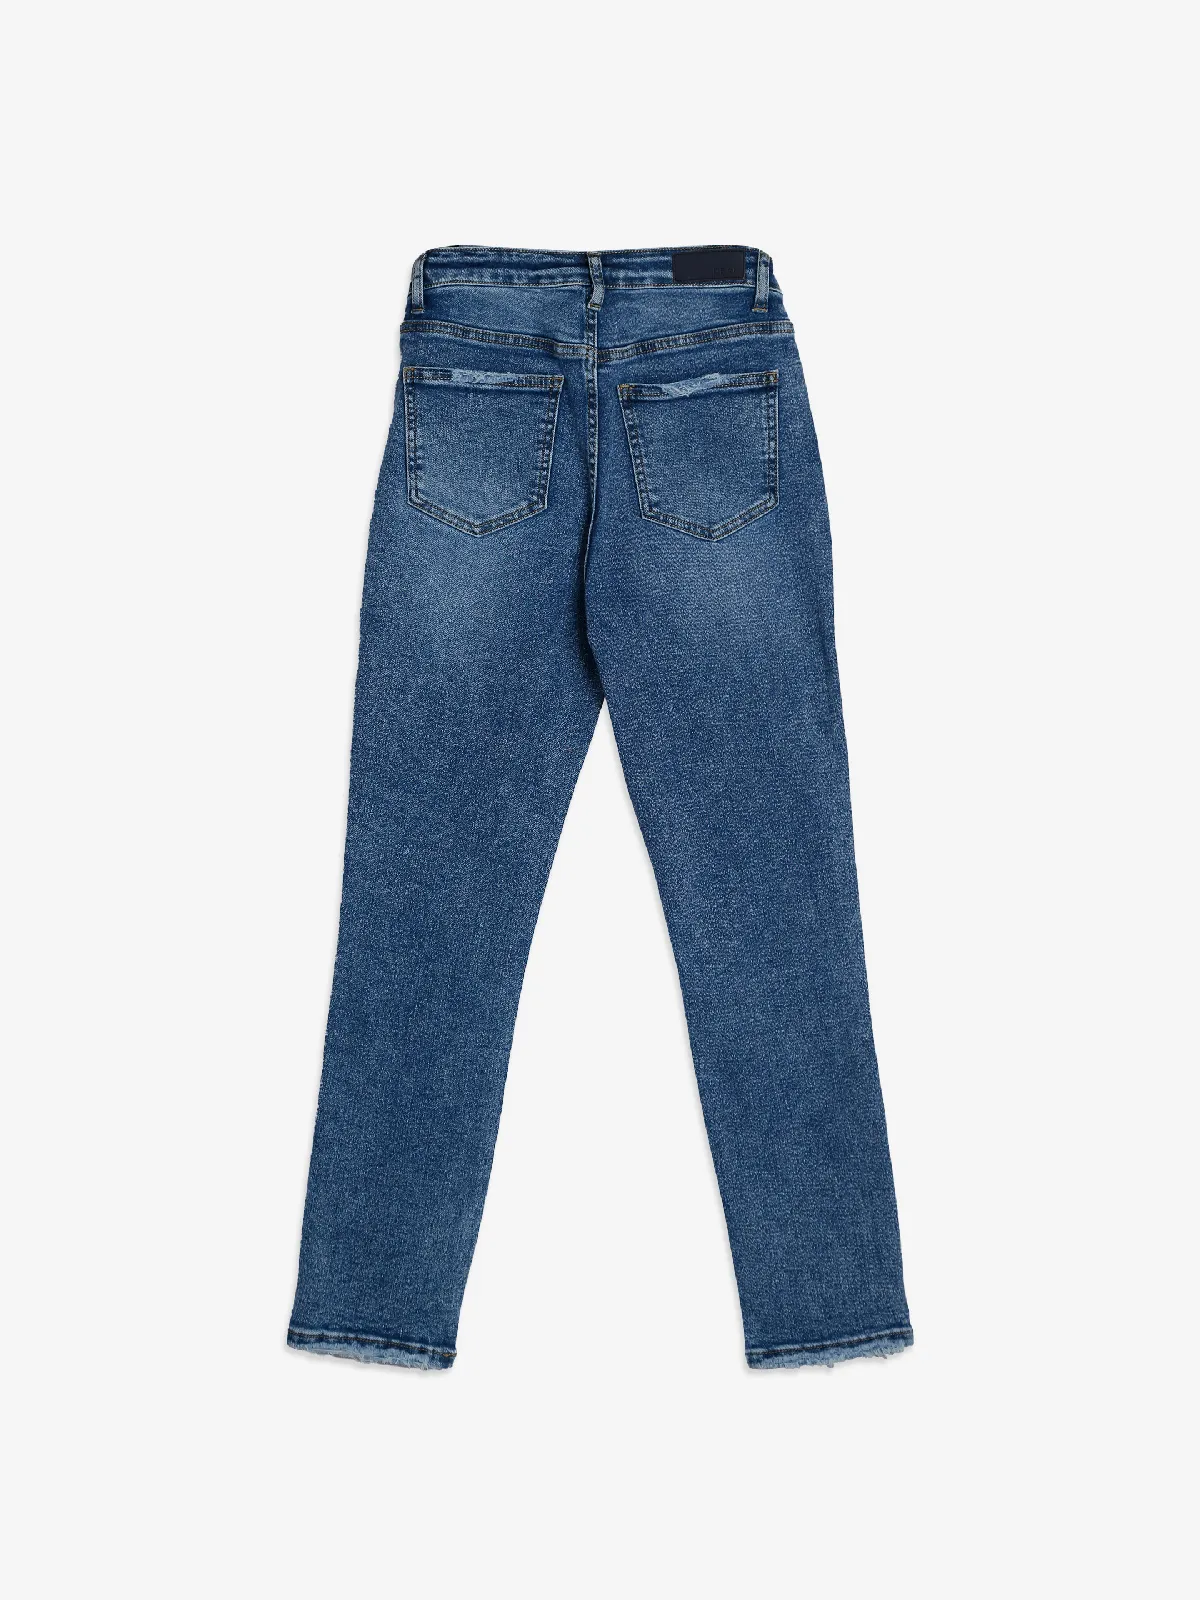 Deal dark blue washed casual jeans